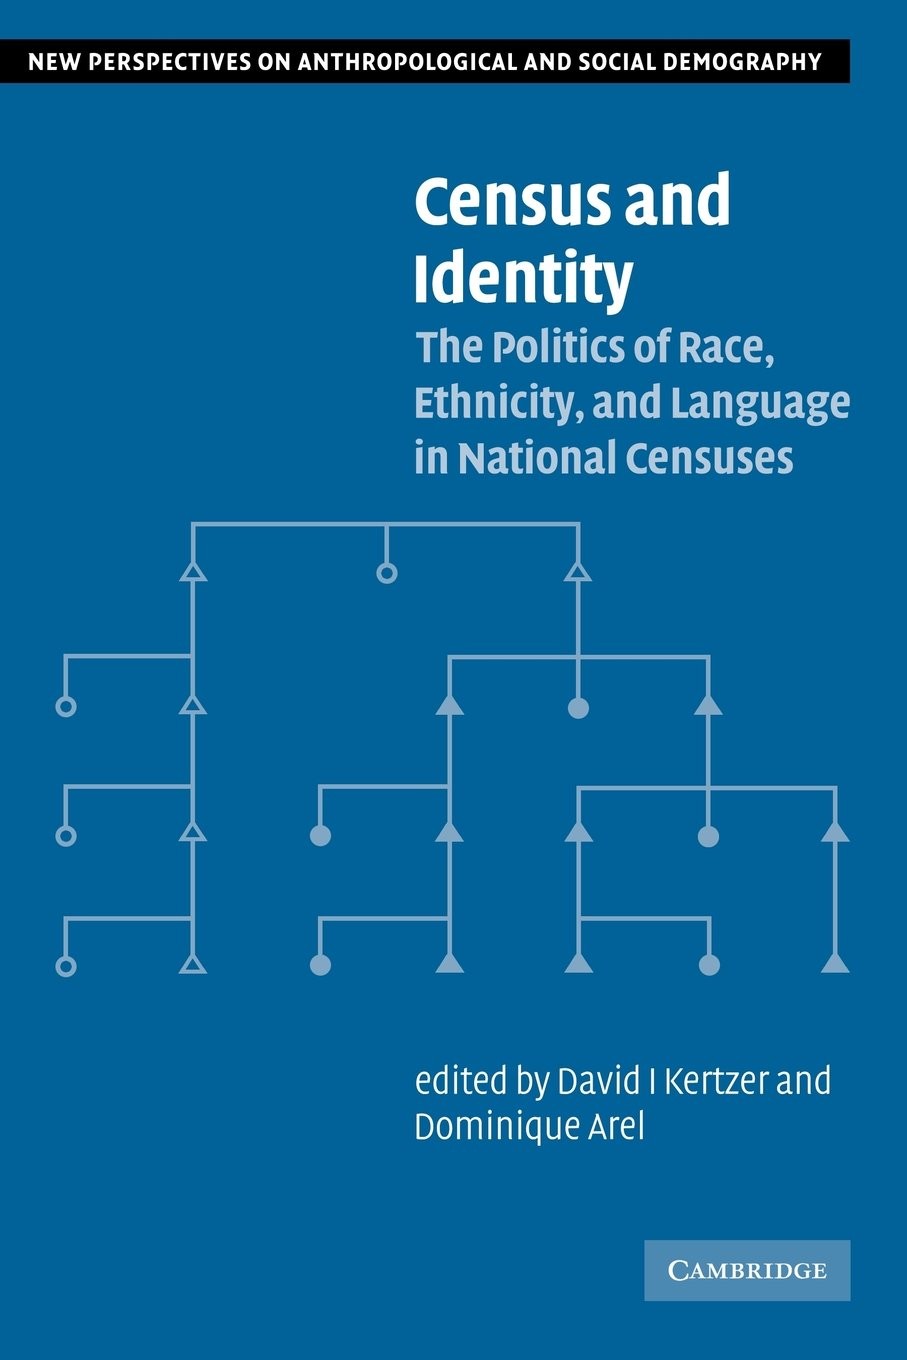 Census and Identity: The Politics of Race, Ethnicity, and Language in National Censuses